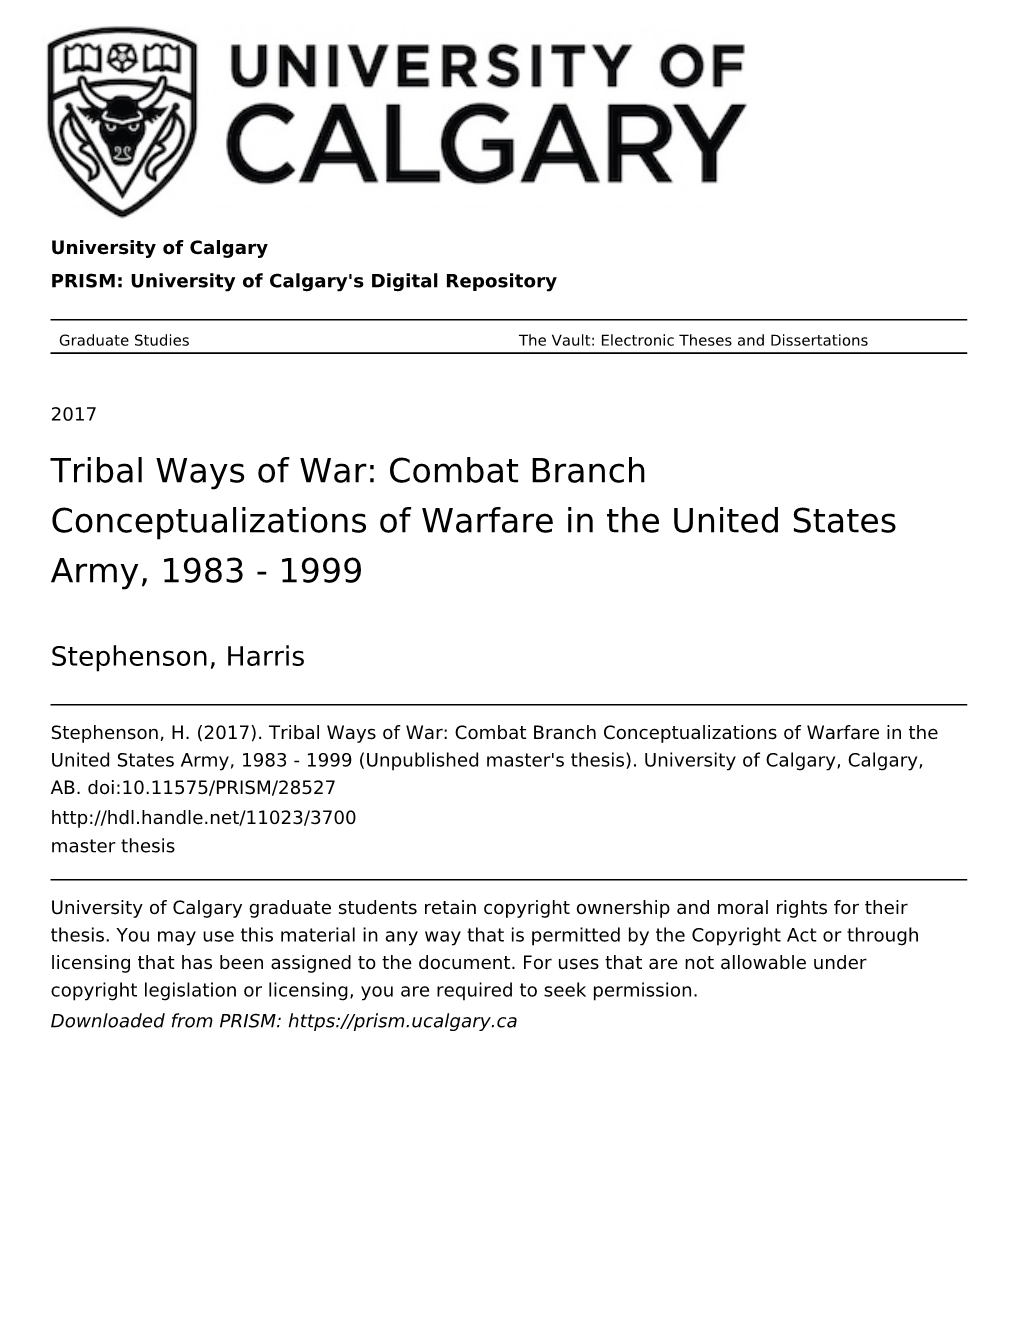 Combat Branch Conceptualizations of Warfare in the United States Army, 1983 - 1999